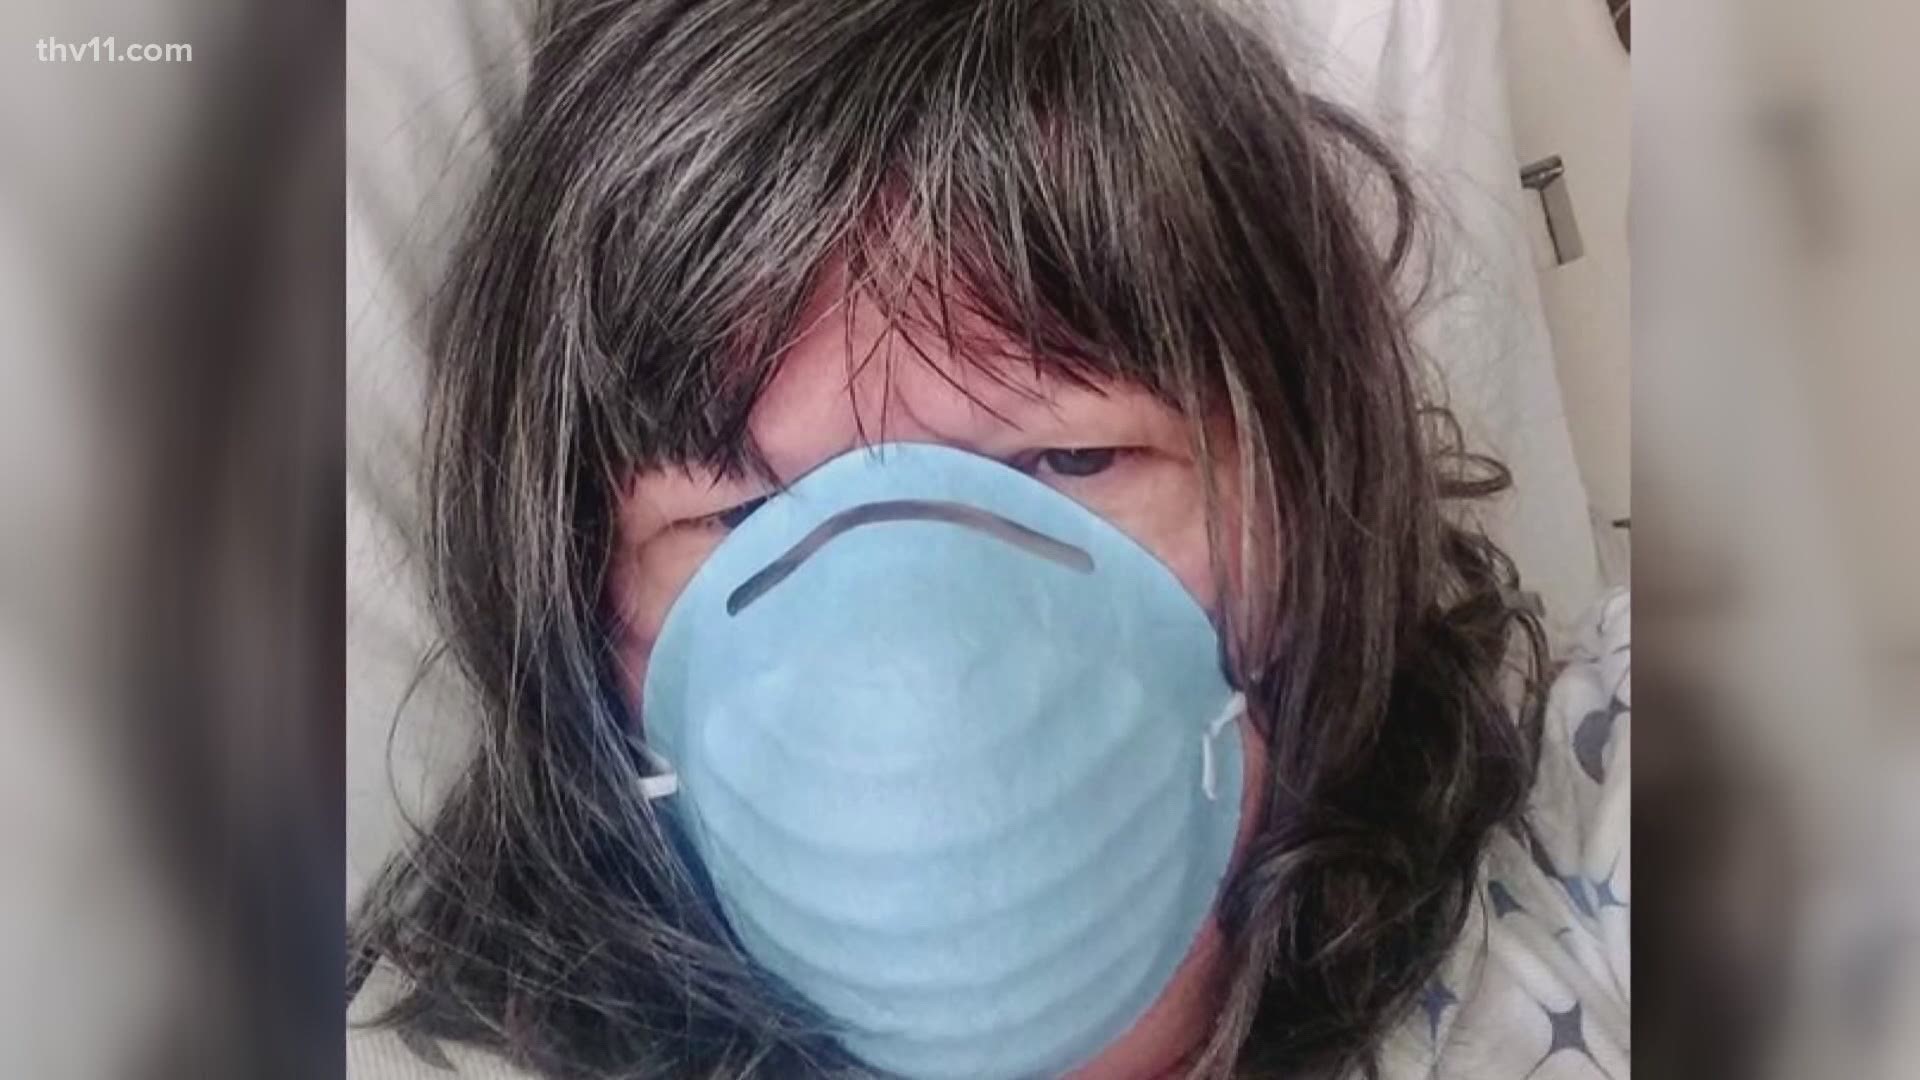 Mental health experts say they see a spike in Arkansans seeking emotional help during the COVID-19 pandemic. One woman shared her story with us.